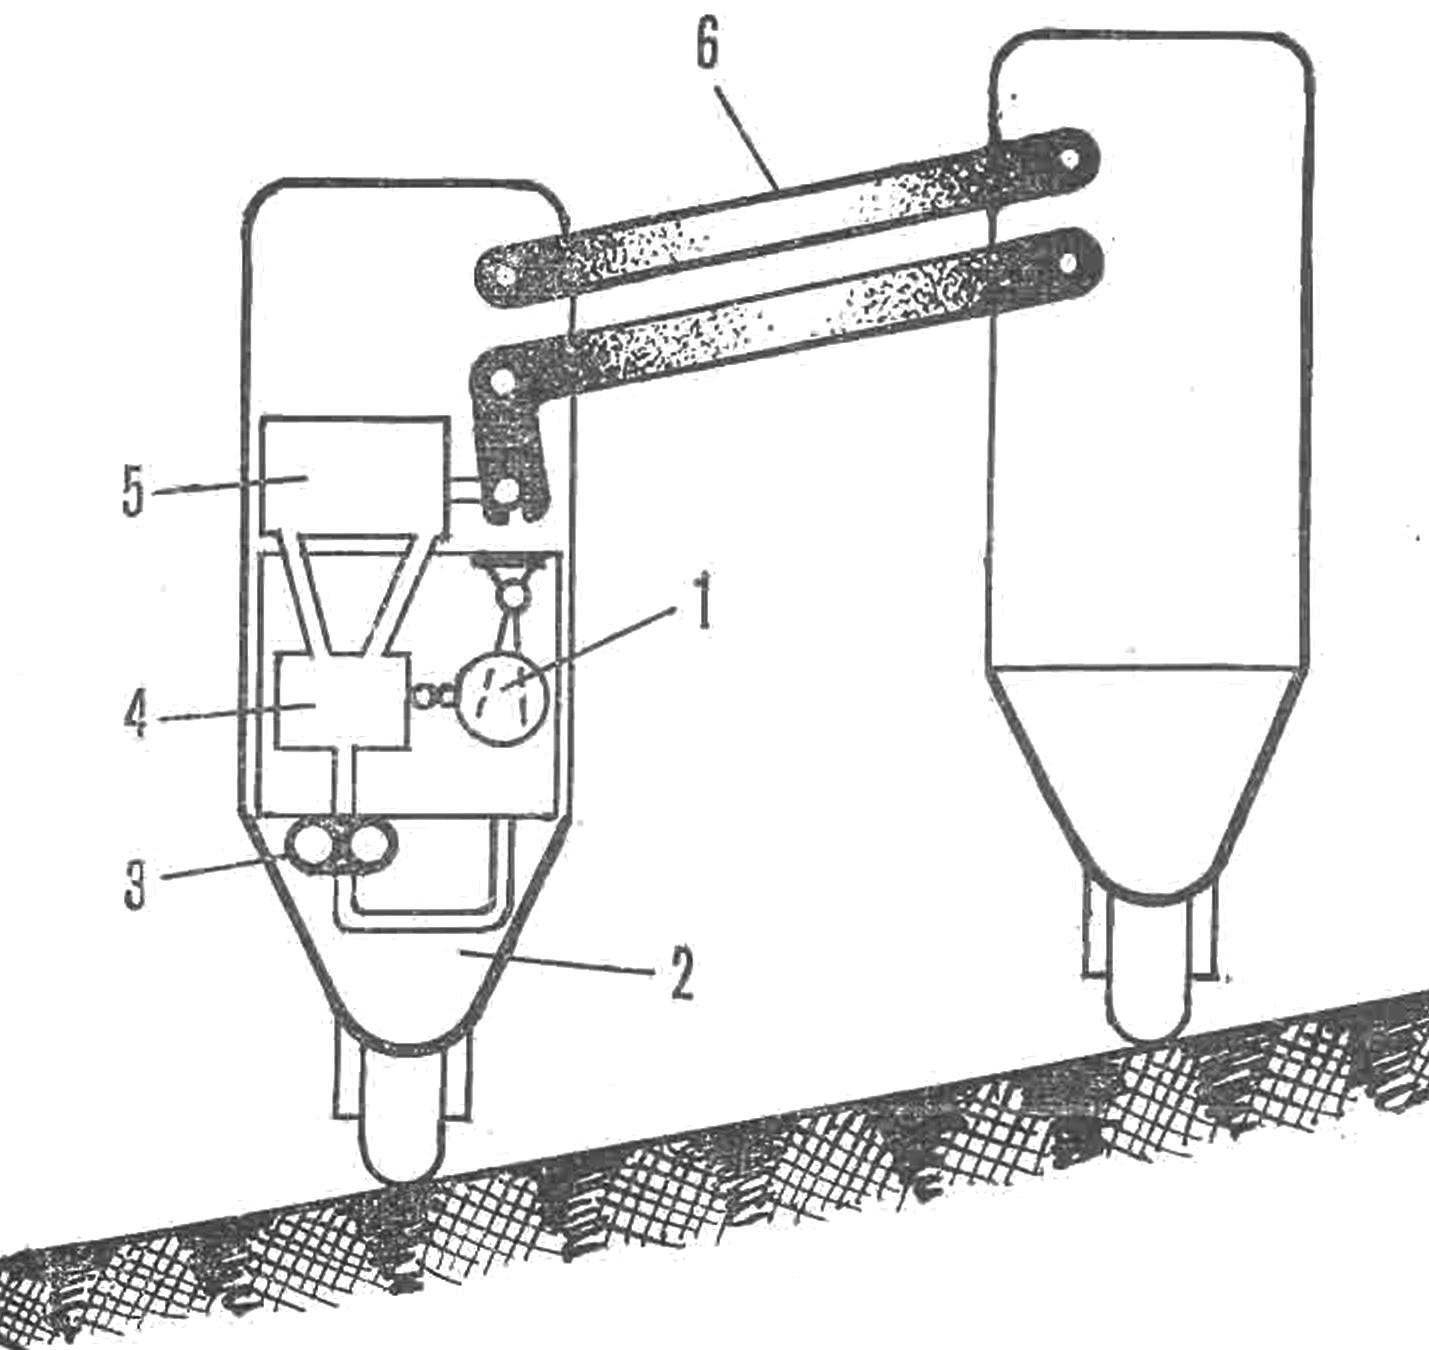 Fig. 2. The scheme of the automatic leveling device